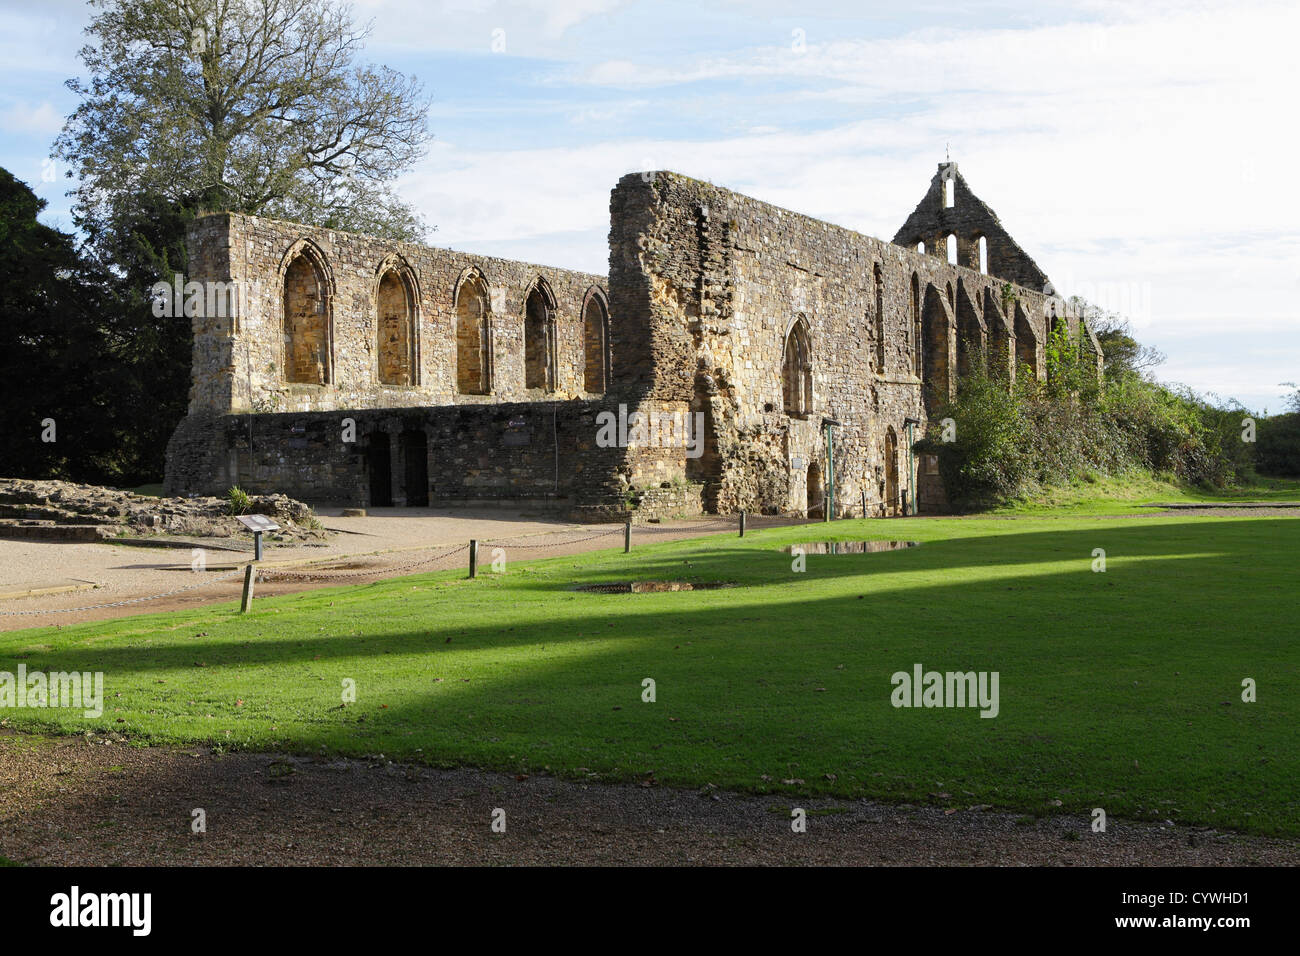 The ruins of Battle Abbey church at the site of the Norman Conquest at the Battle of Hastings in 1066, Sussex, England, UK, GB Stock Photo